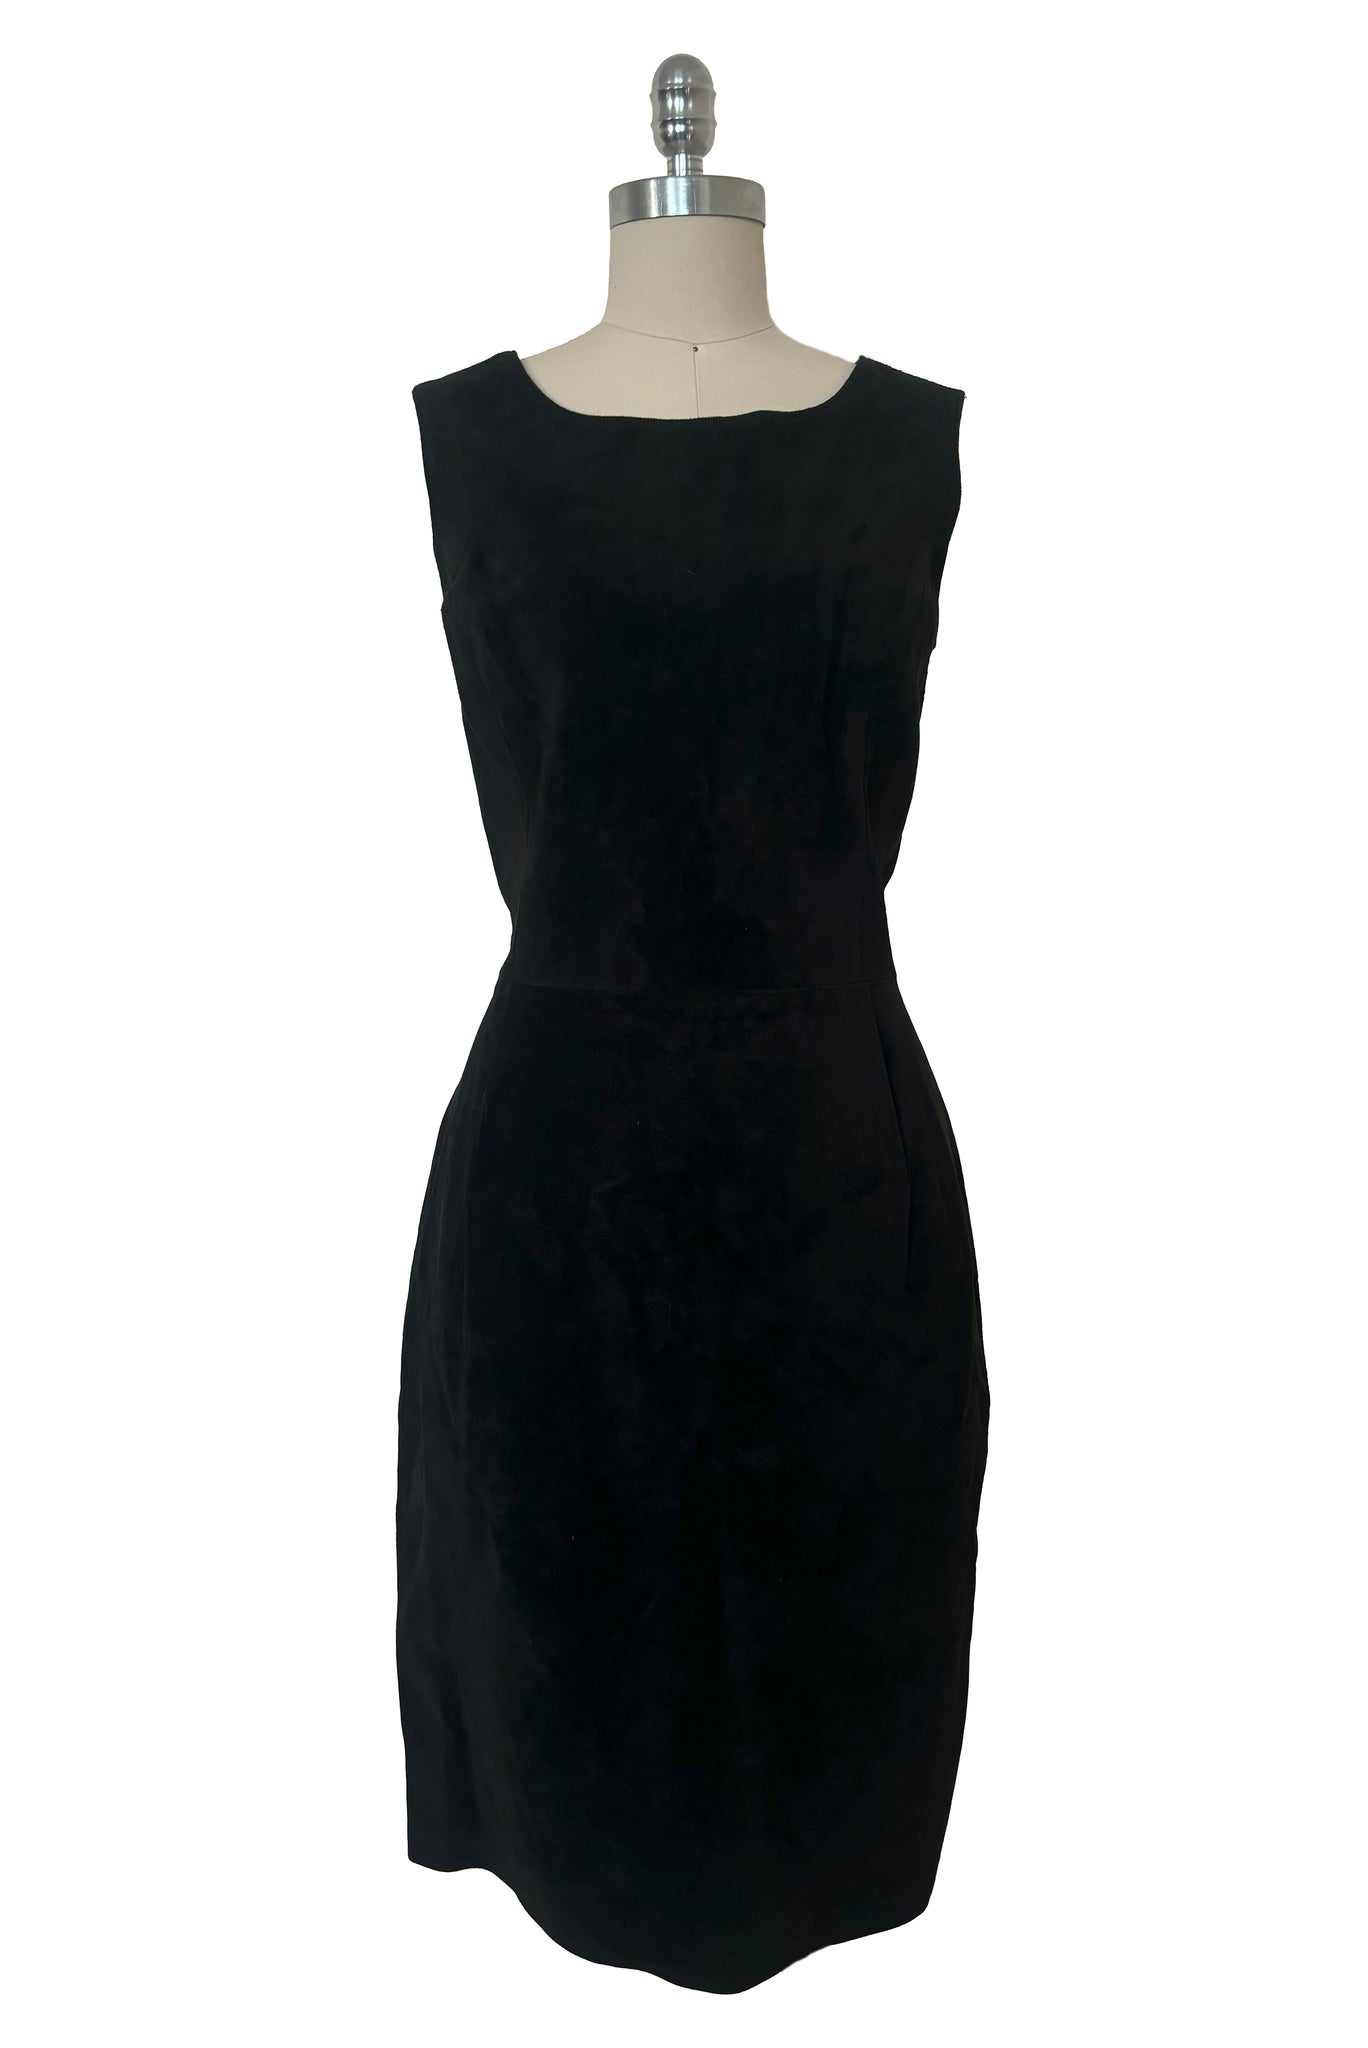 1990s Vintage Black Suede Sheath Dress by Bagatelle, Small to Medium